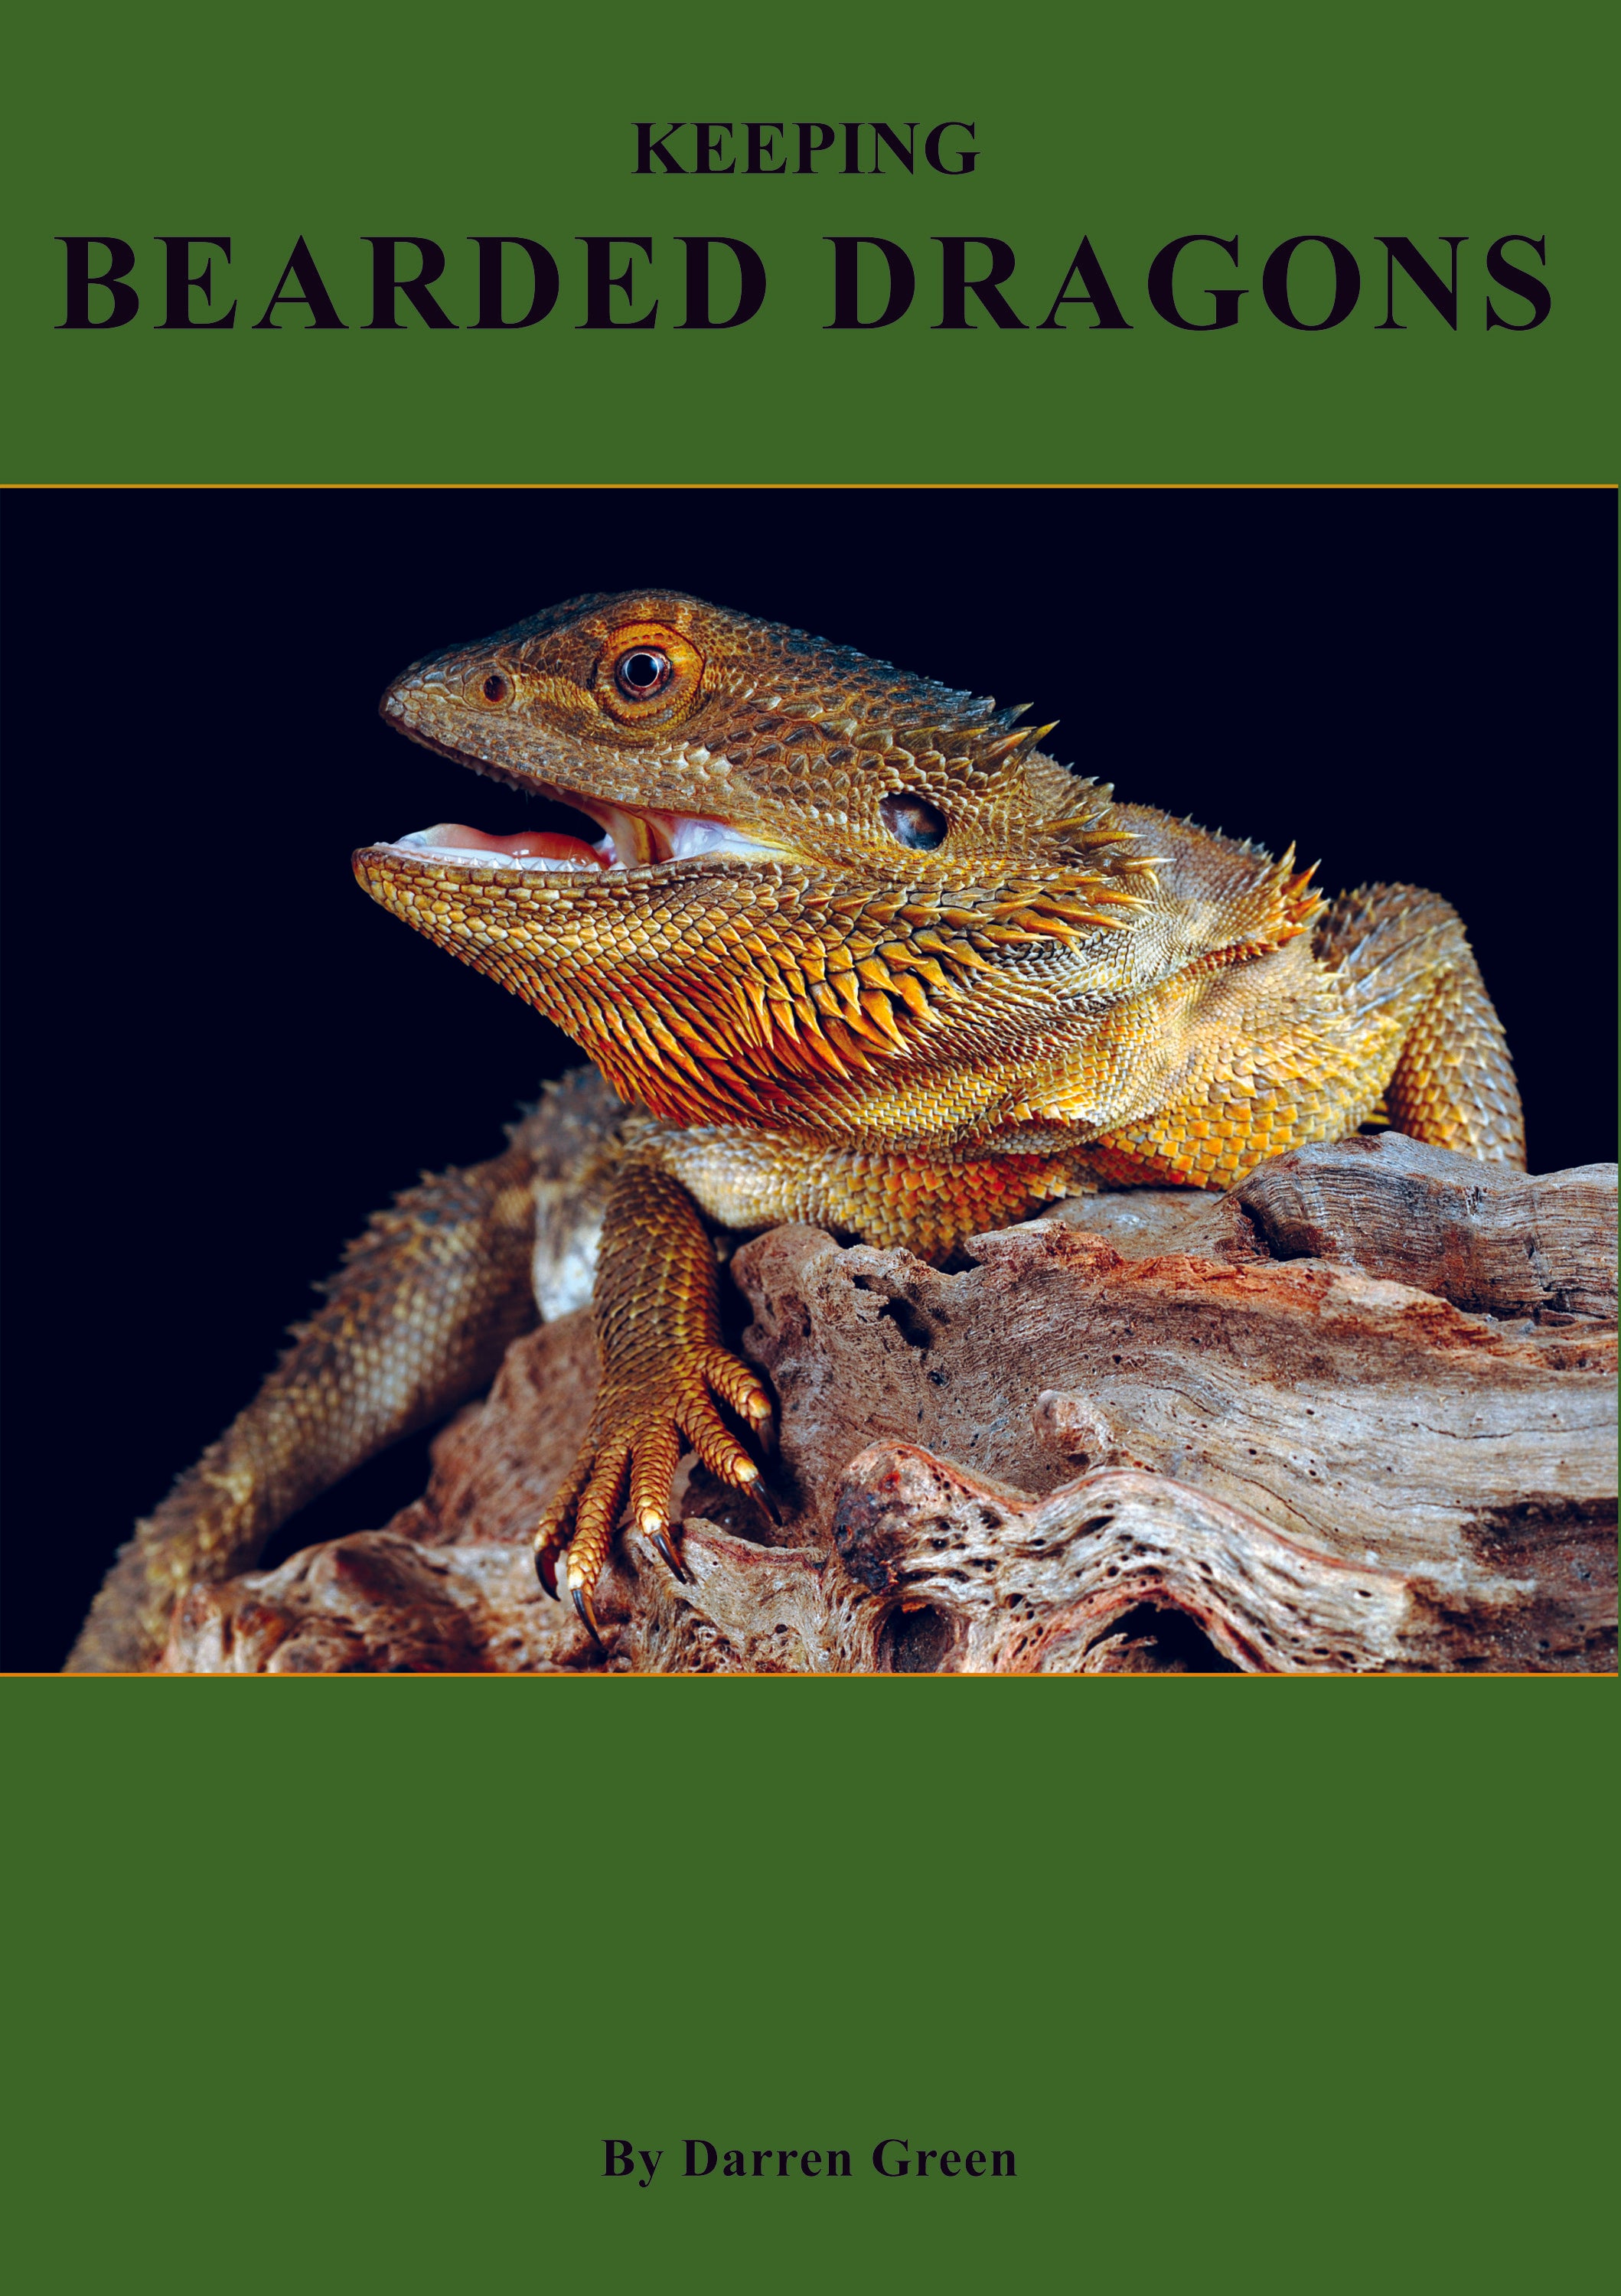 Keeping Bearded Dragons—Revised Edition